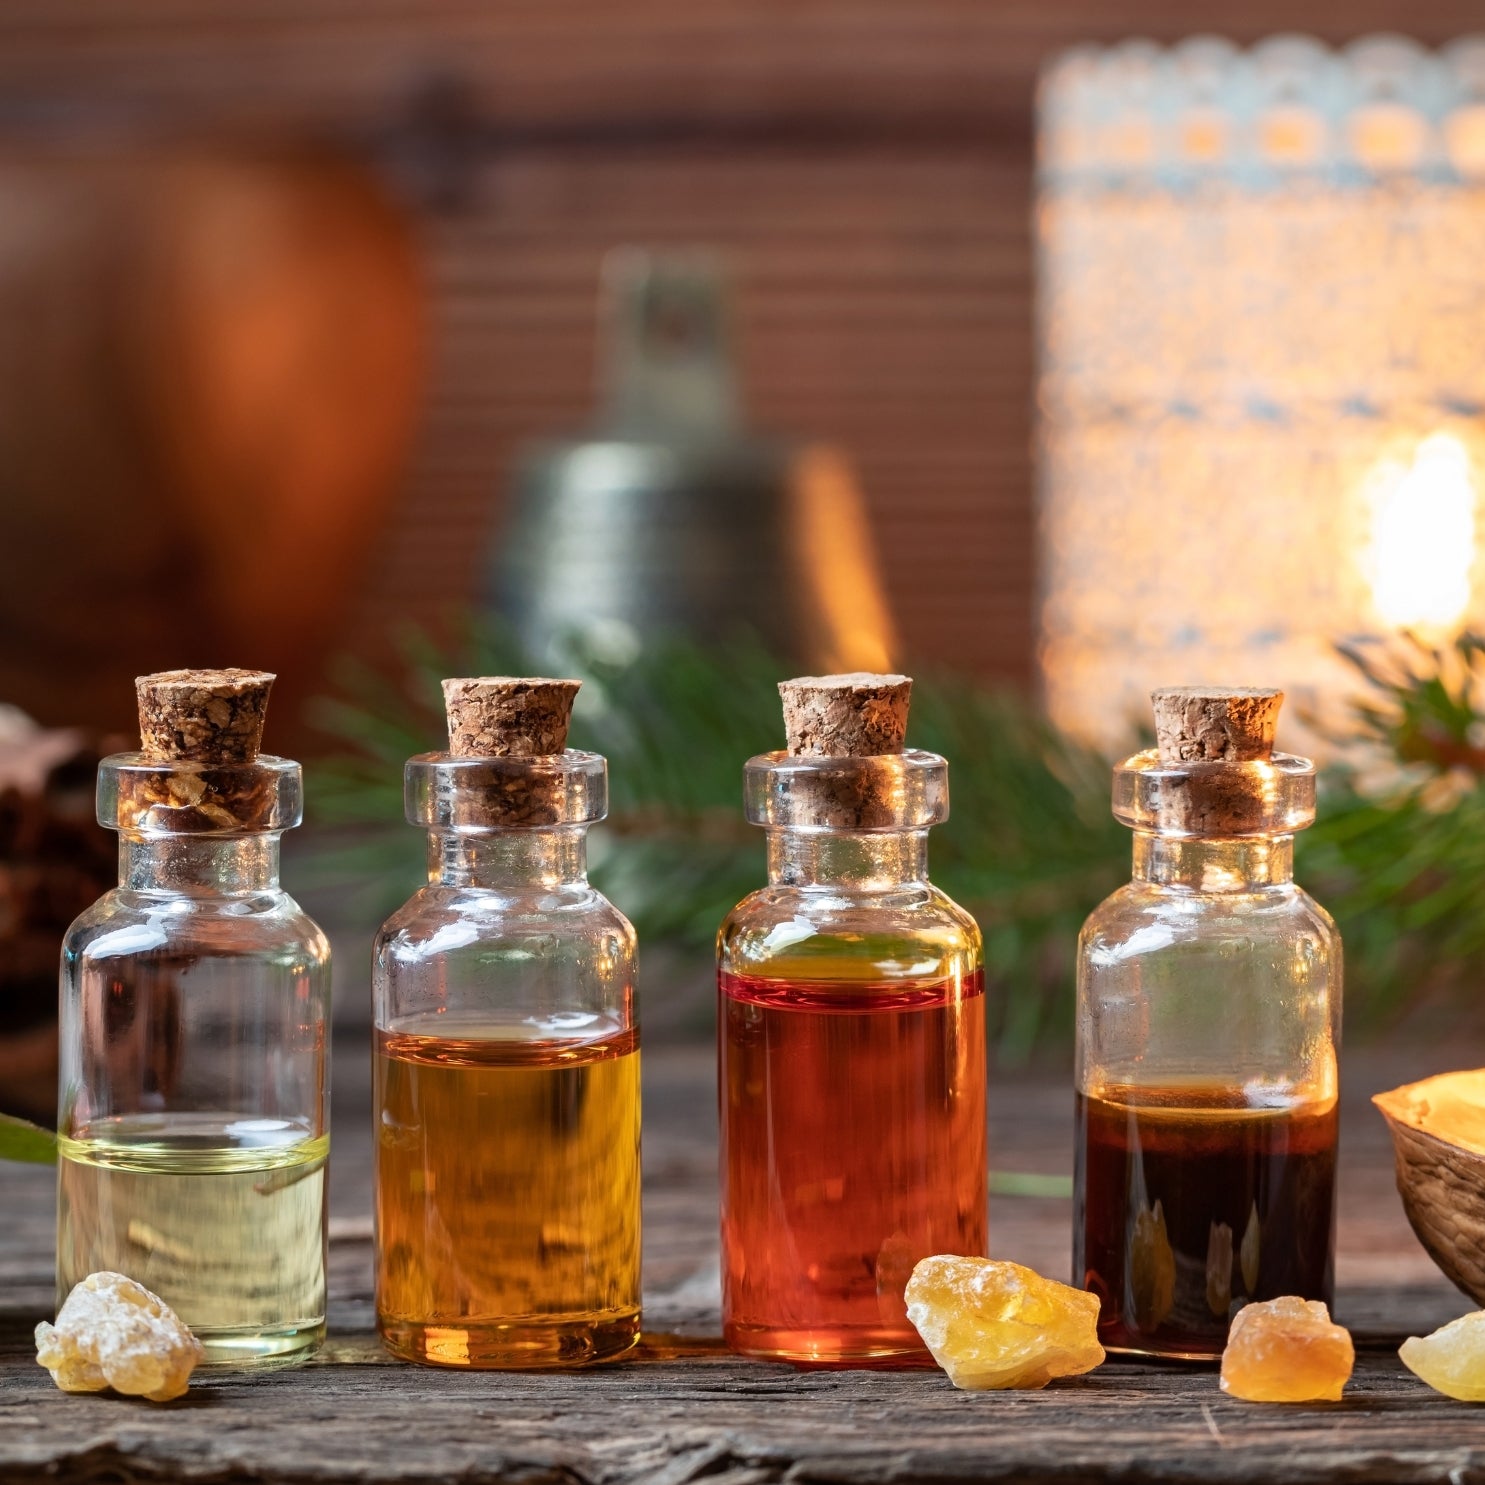 Fragrance Oil vs. Essential Oil - What's the Difference?